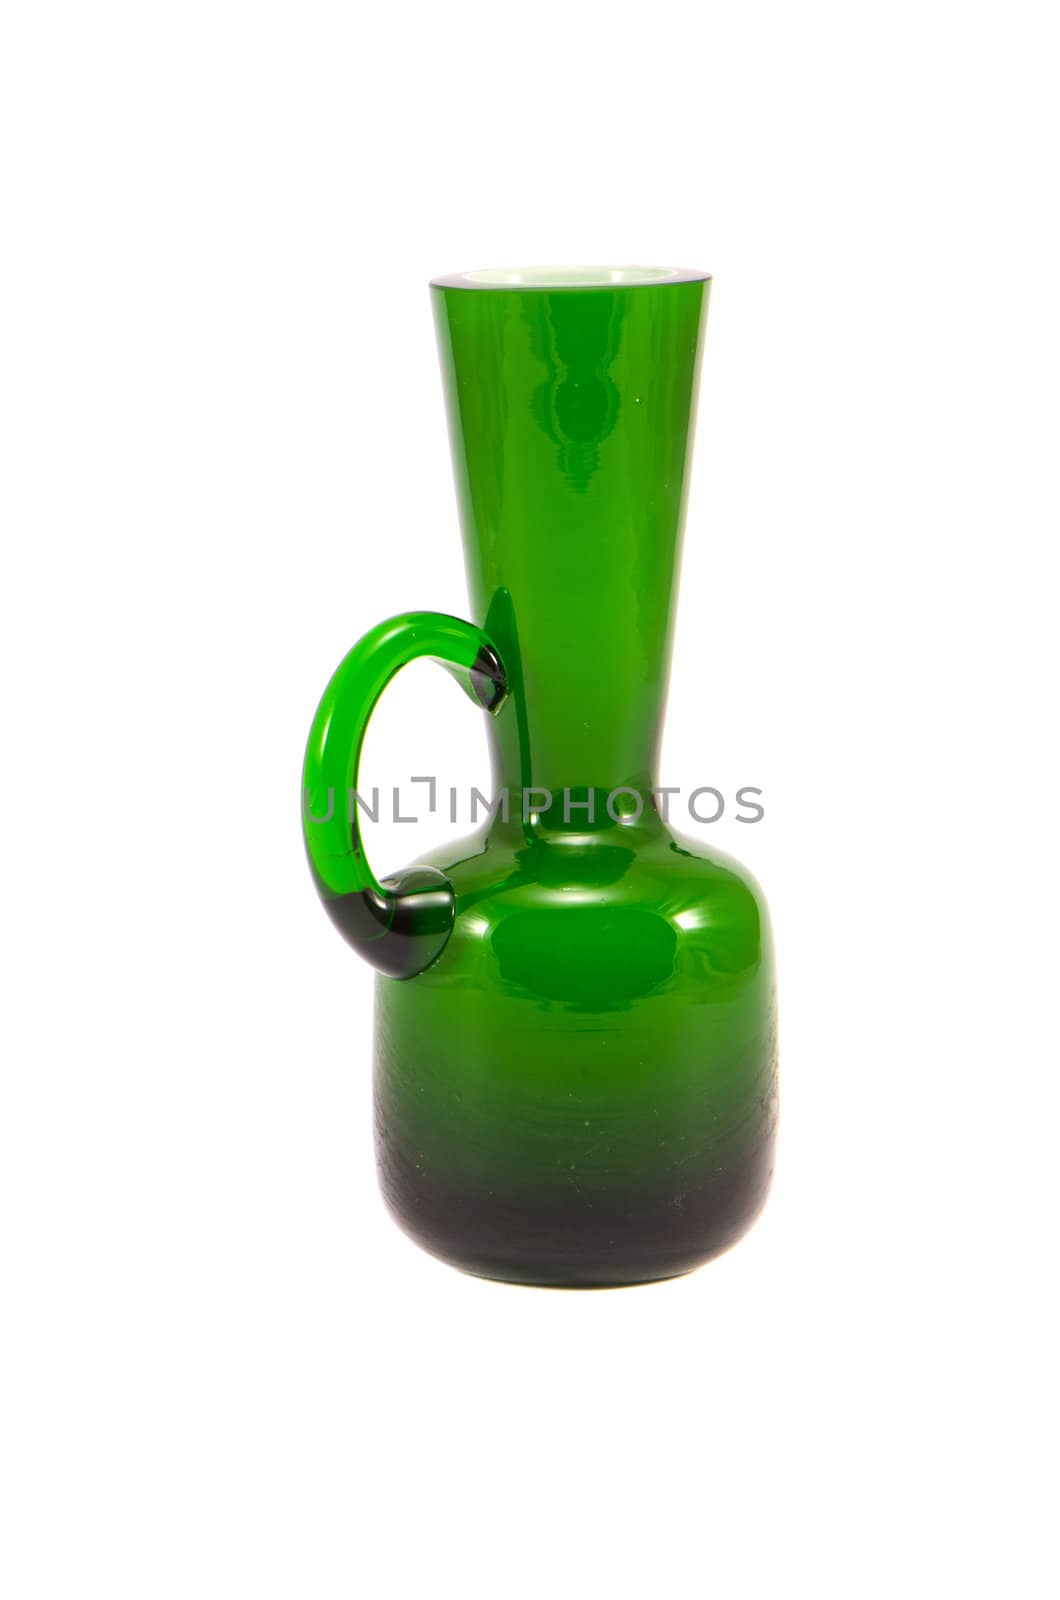 isolated on white background empty green glass vase